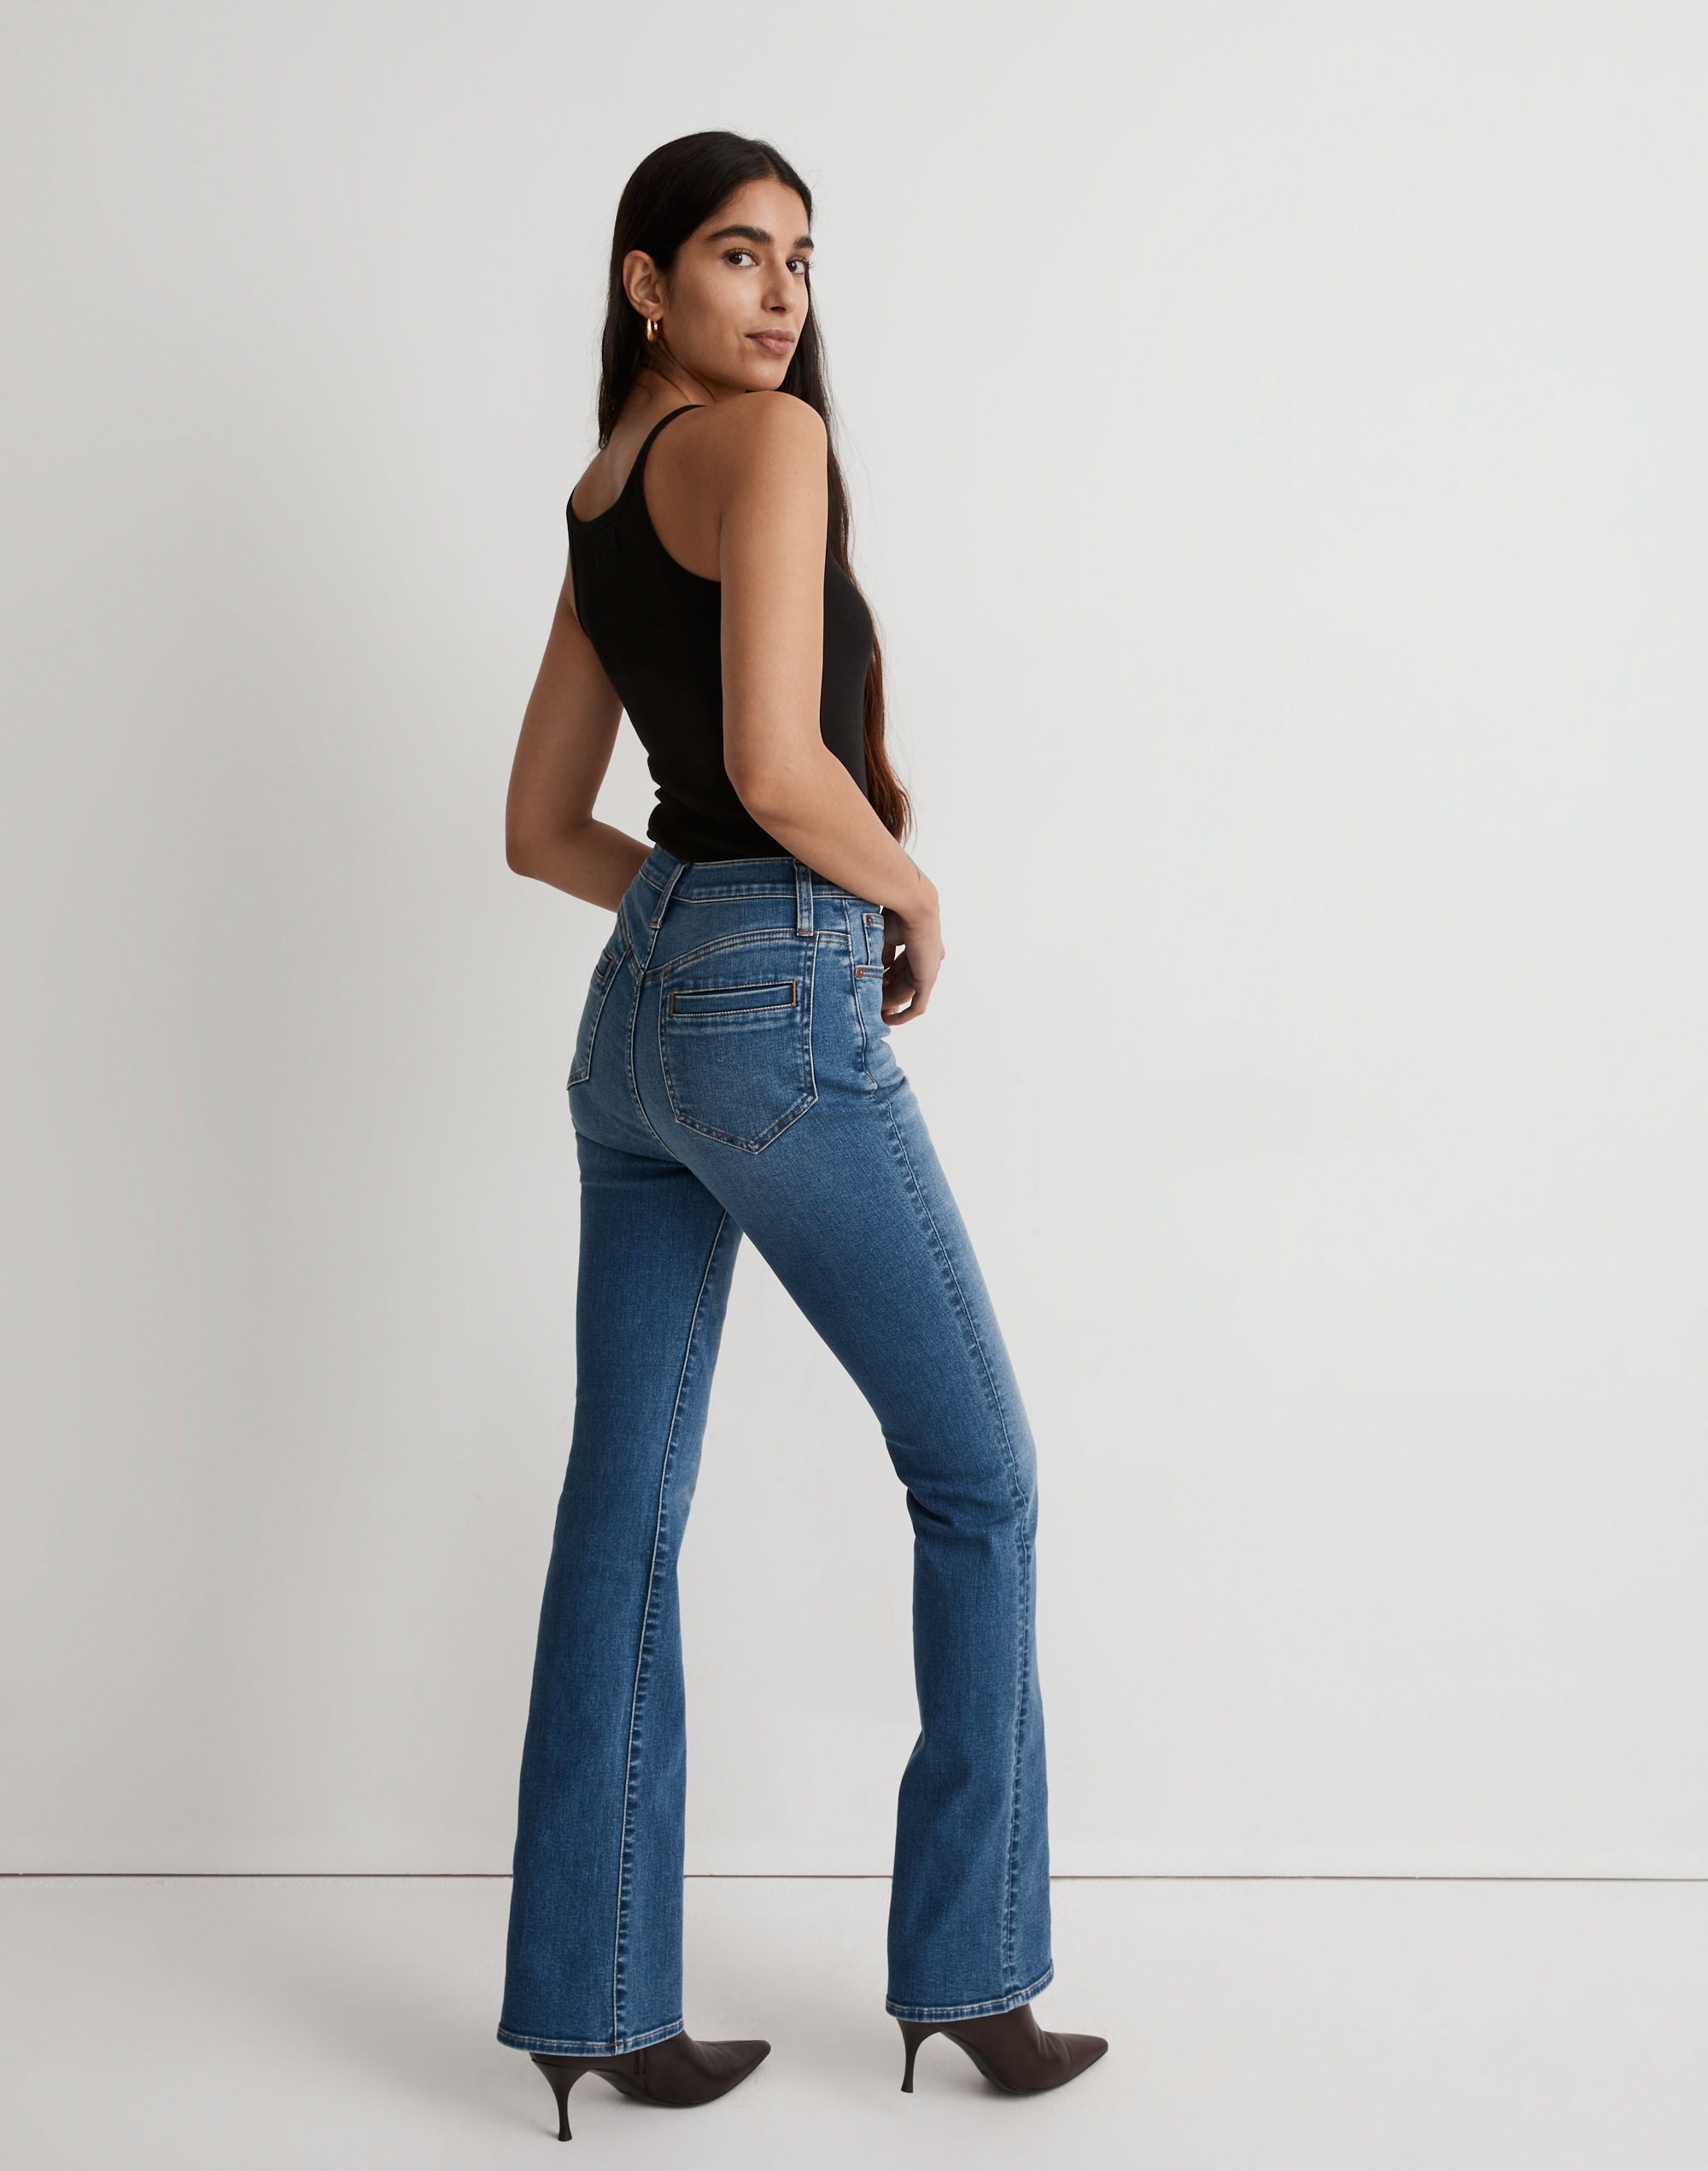 Skinny Flare Jeans in Elevere Wash